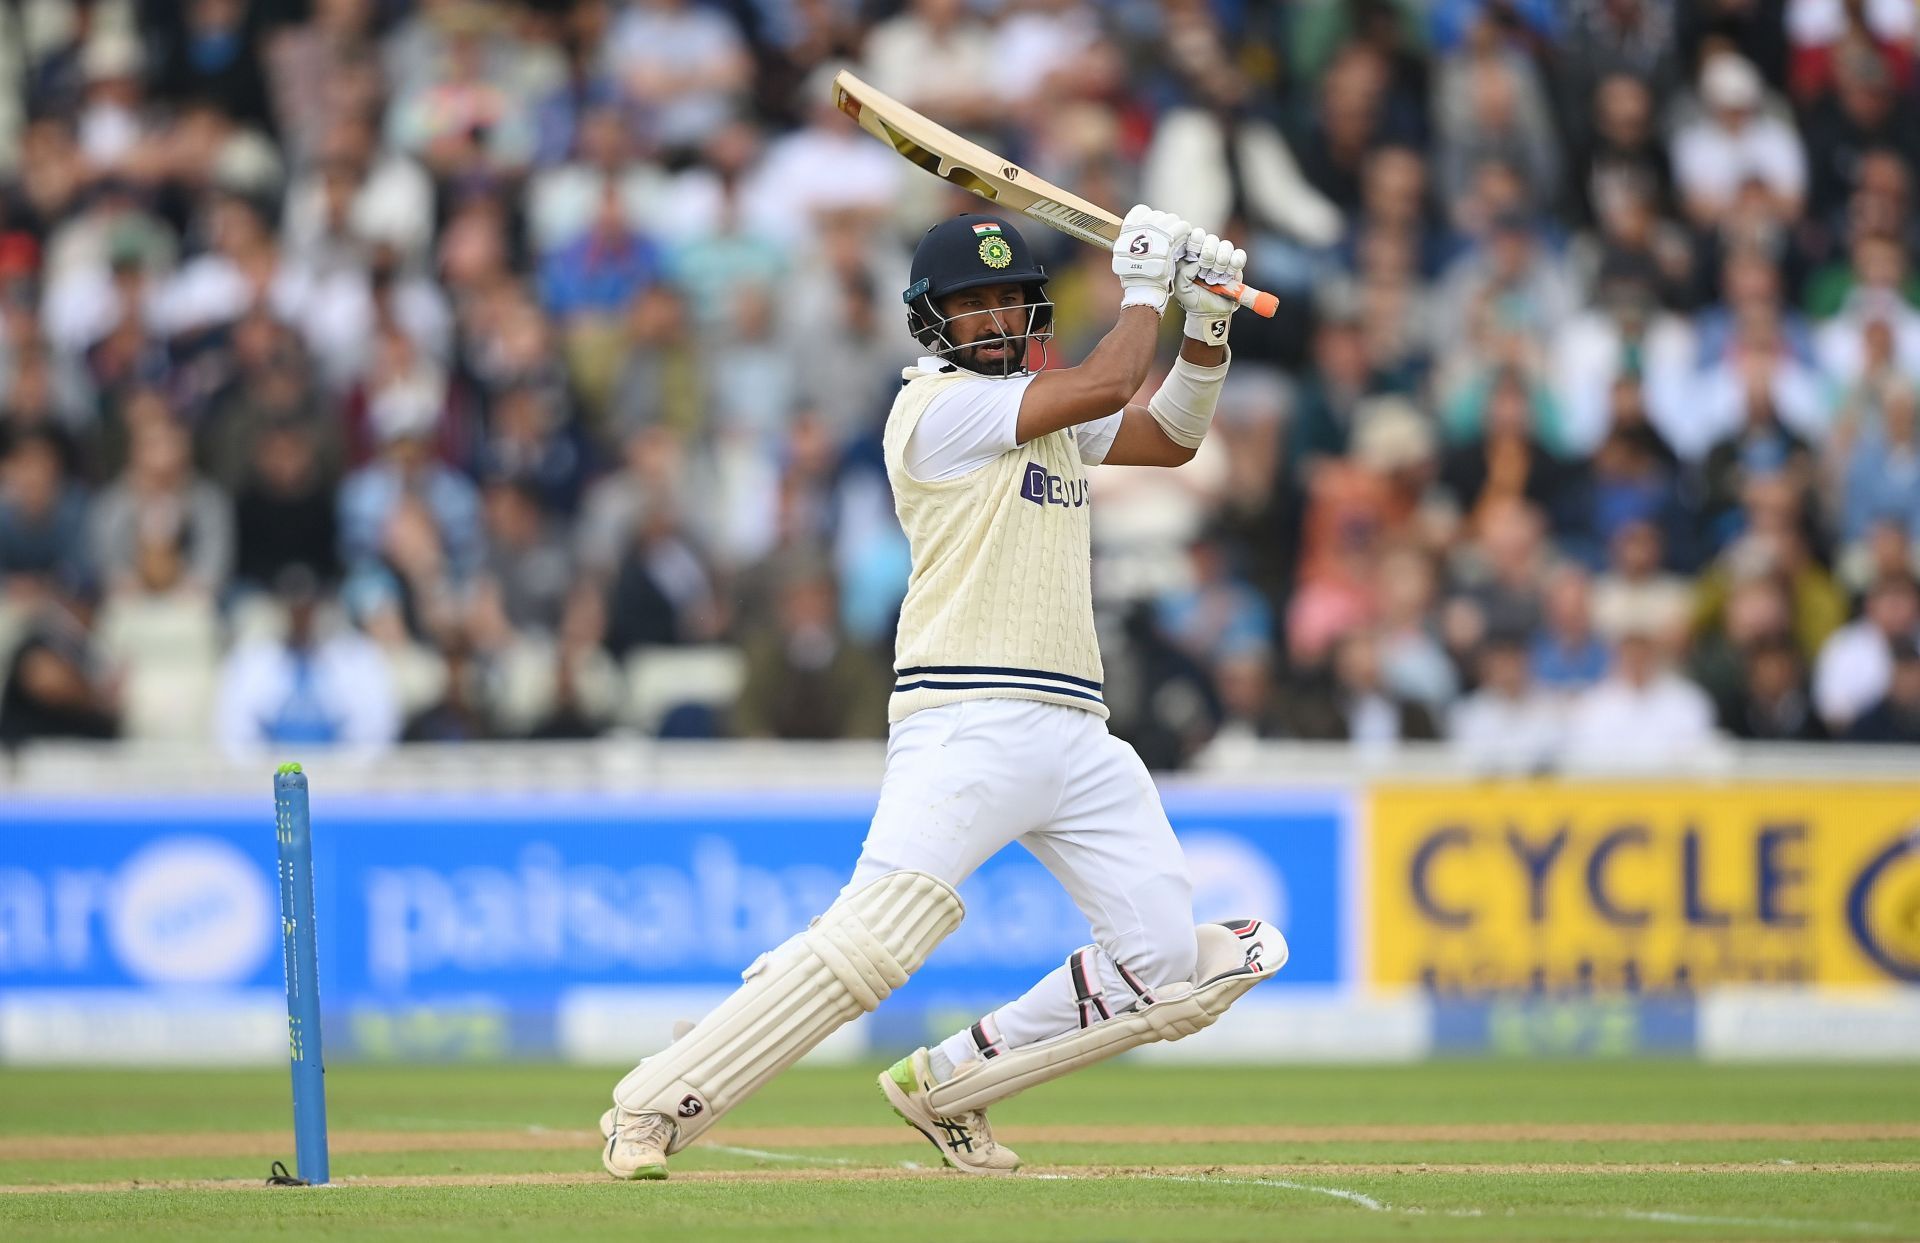 The India No. 3 has also opened the innings for India. Pic: Getty Images